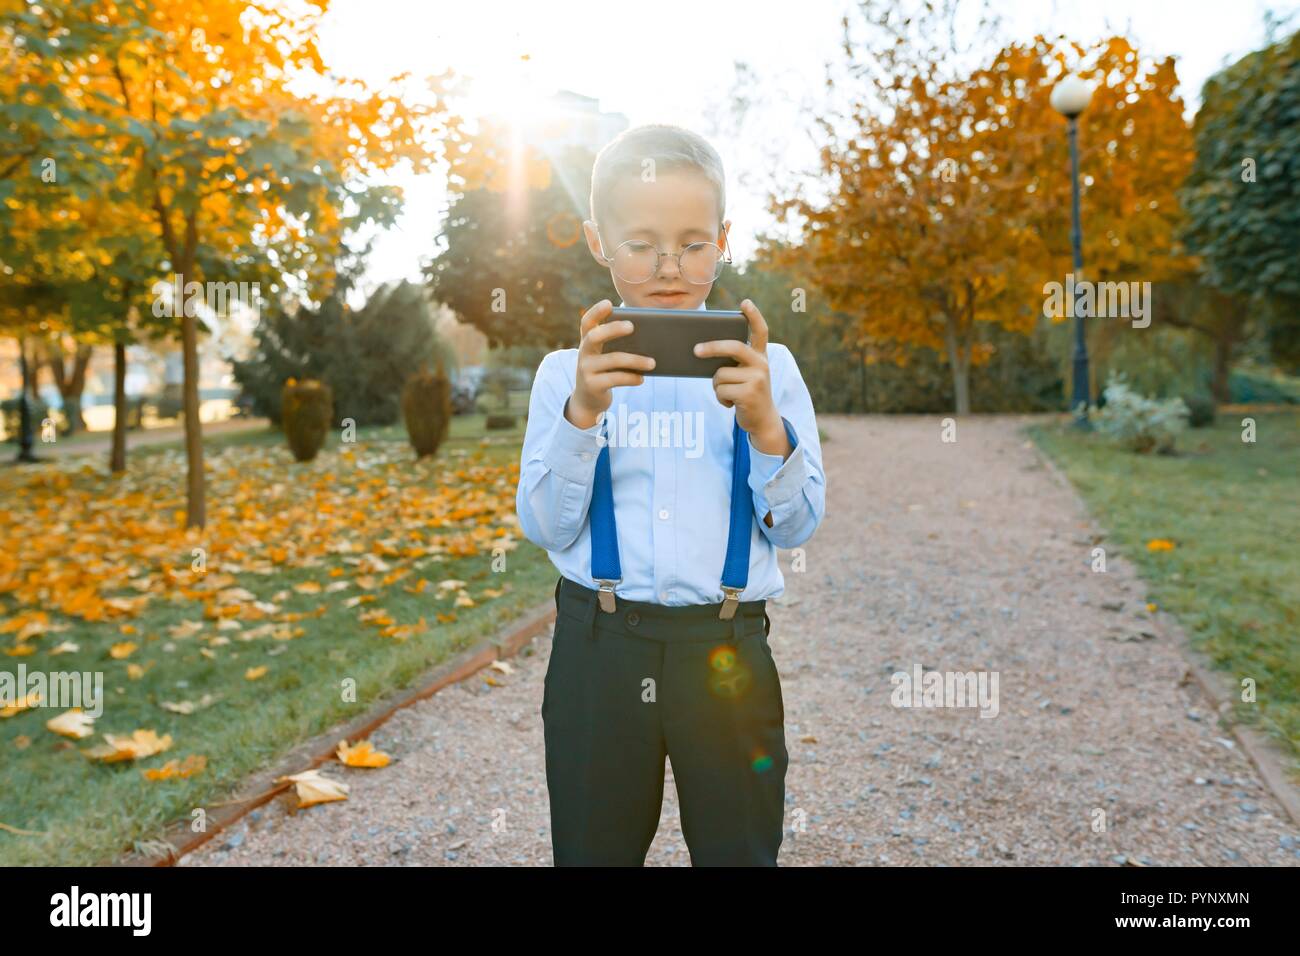 Smart boy in glasses with a mobile phone. A child in a classic shirt in suspenders for trousers, sunny park background, the golden hour. Stock Photo